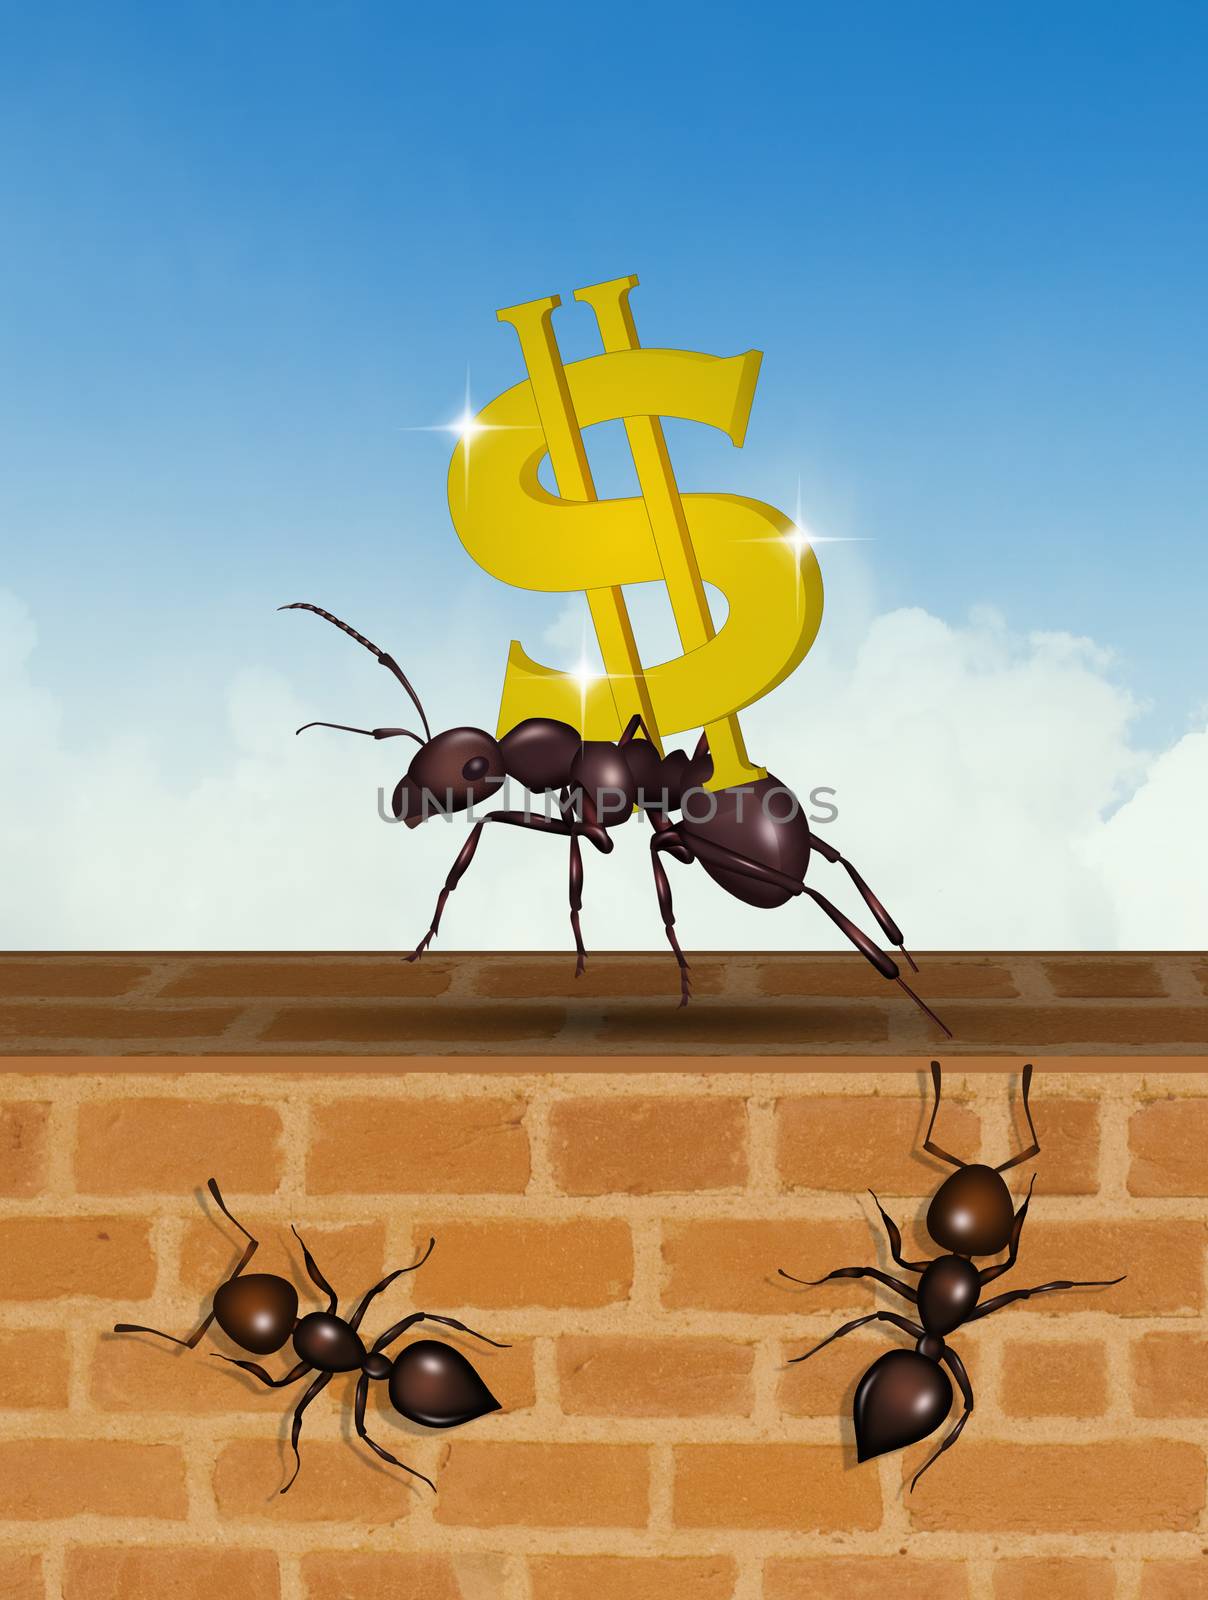 ants team up for success by adrenalina